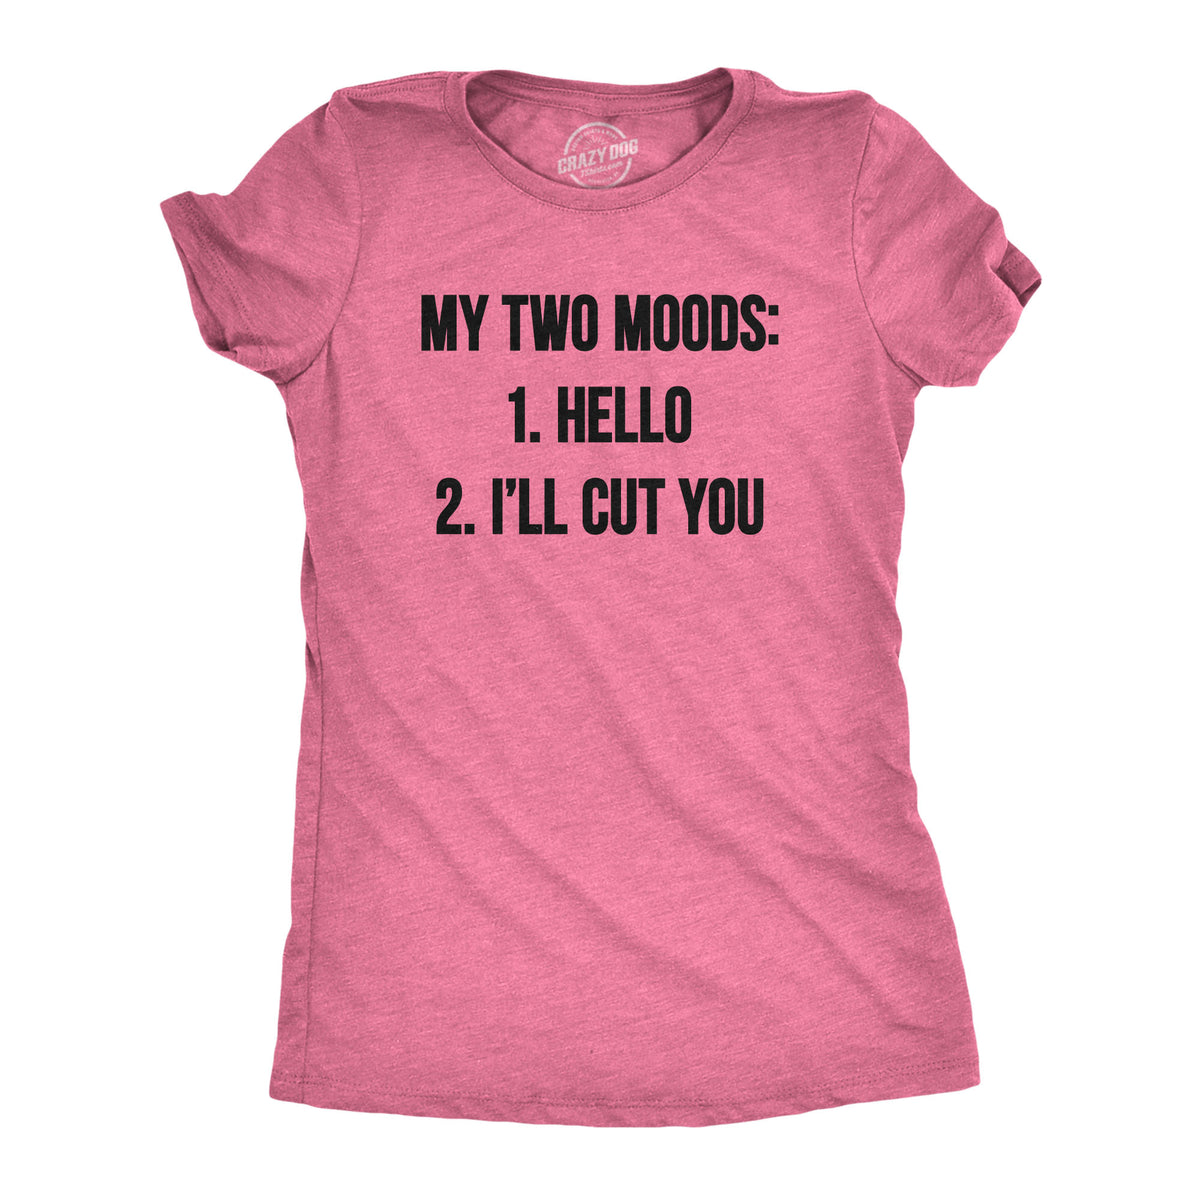 Funny Heather Pink My Two Moods Womens T Shirt Nerdy Introvert Tee